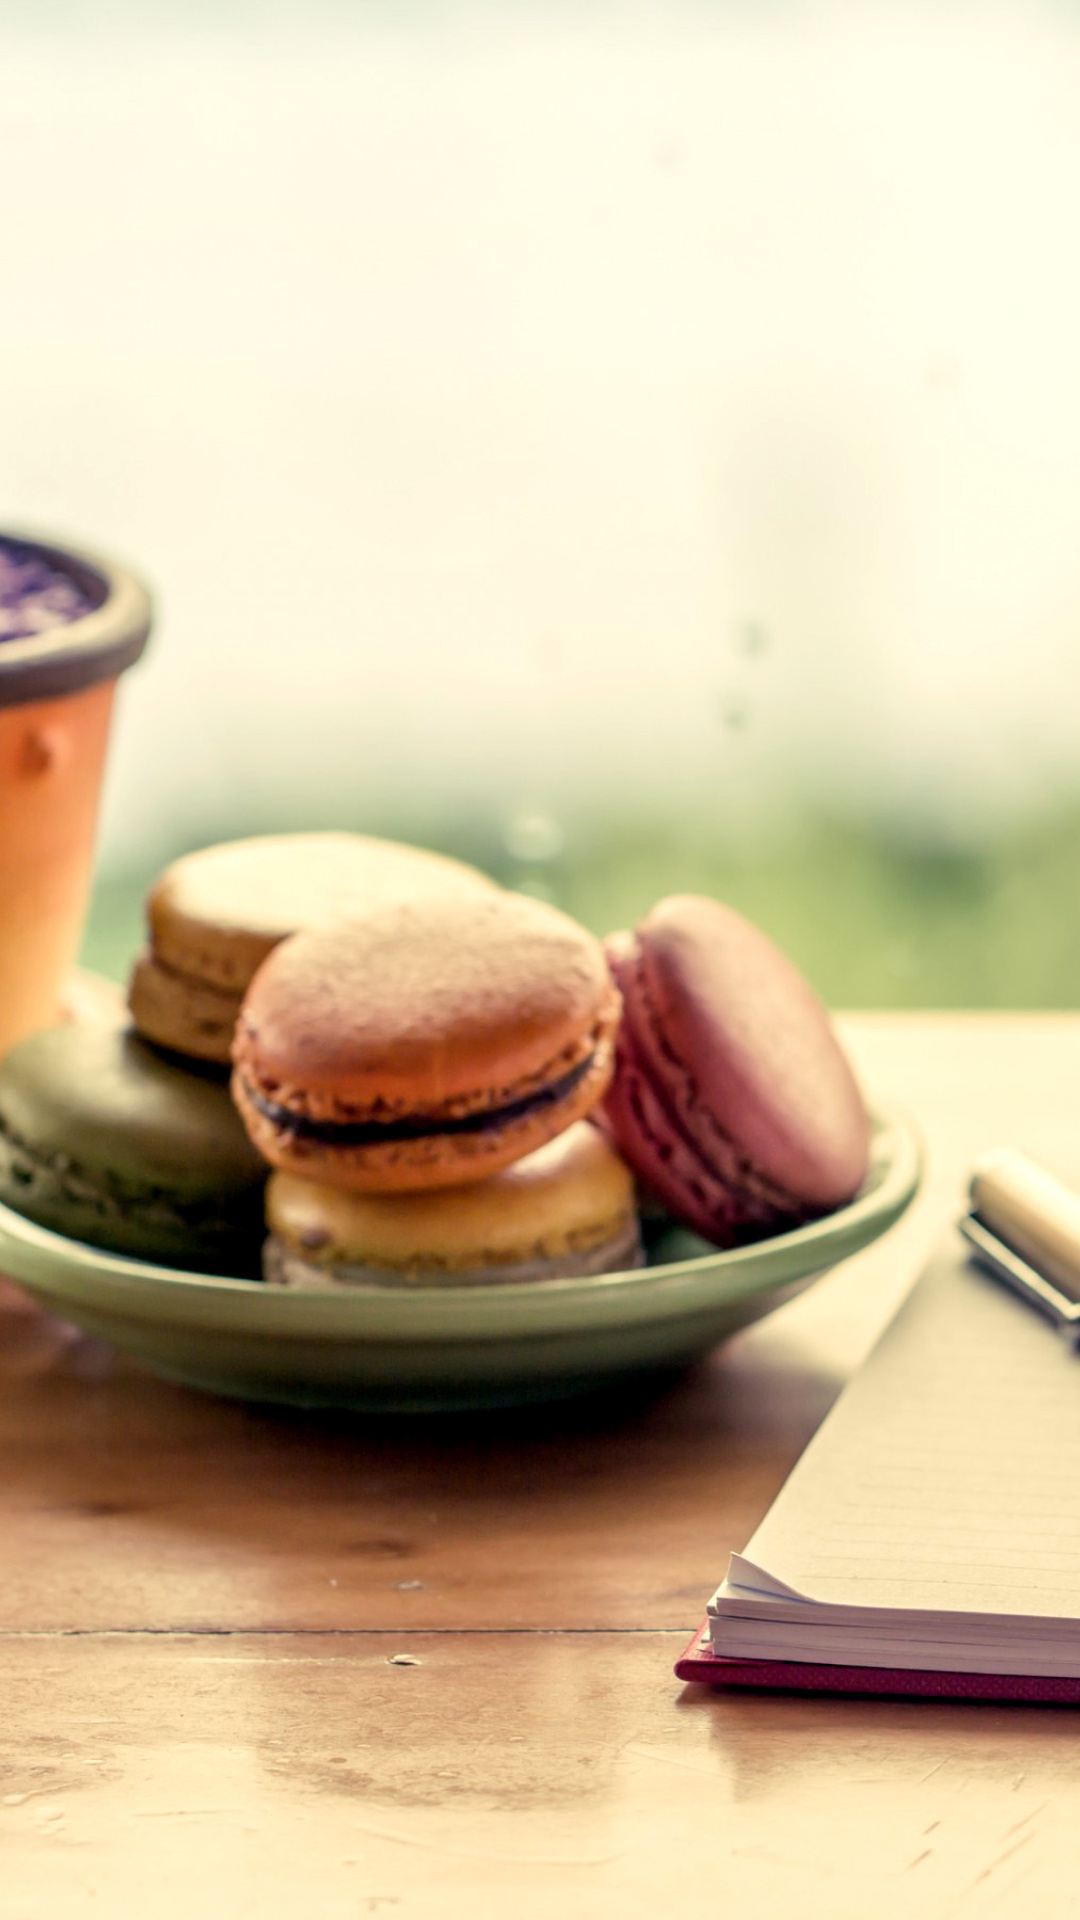 Macaroons and Notebook wallpaper 1080x1920